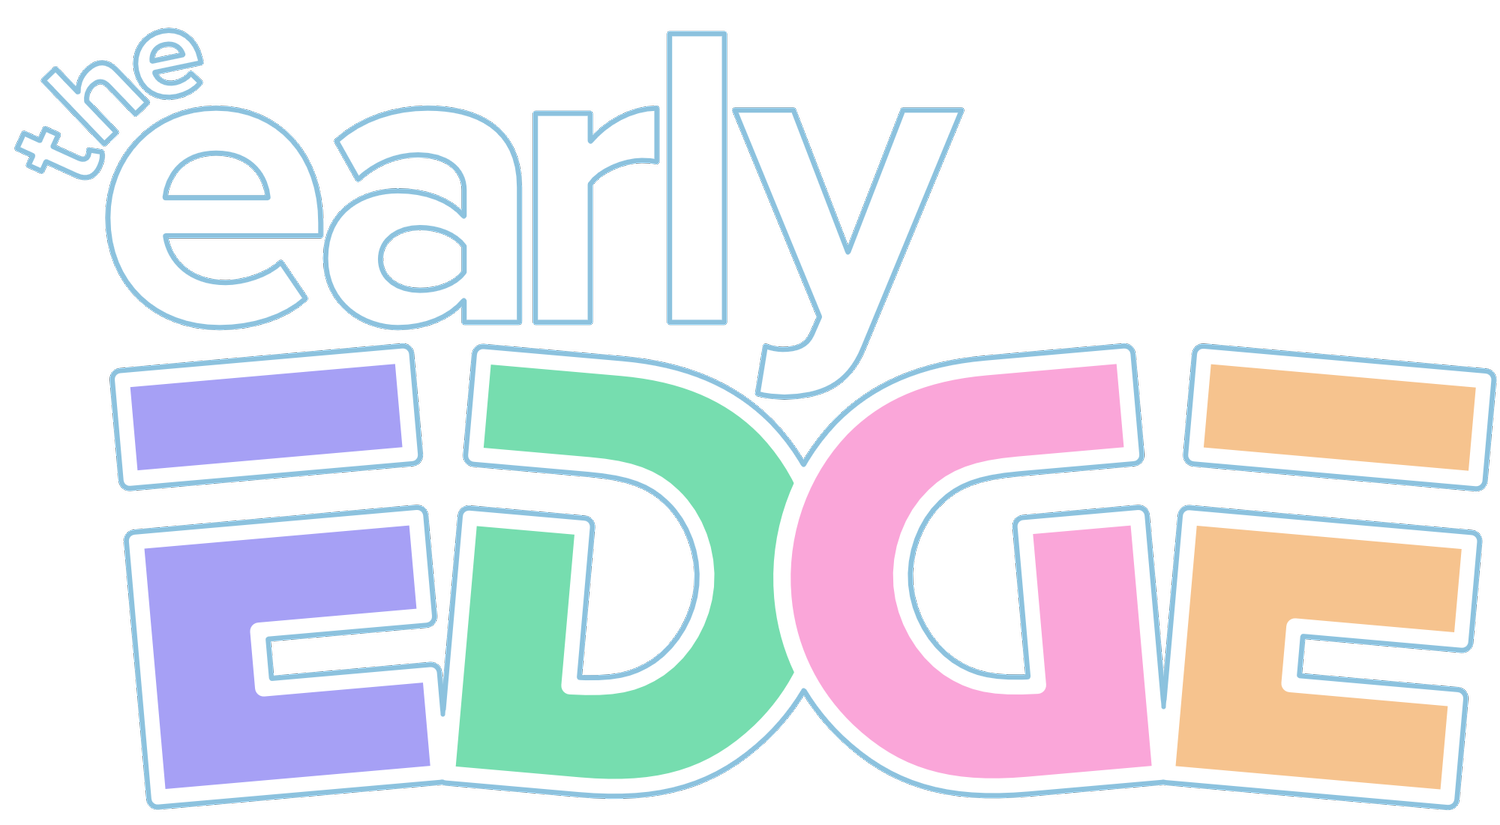 The Early EDGE